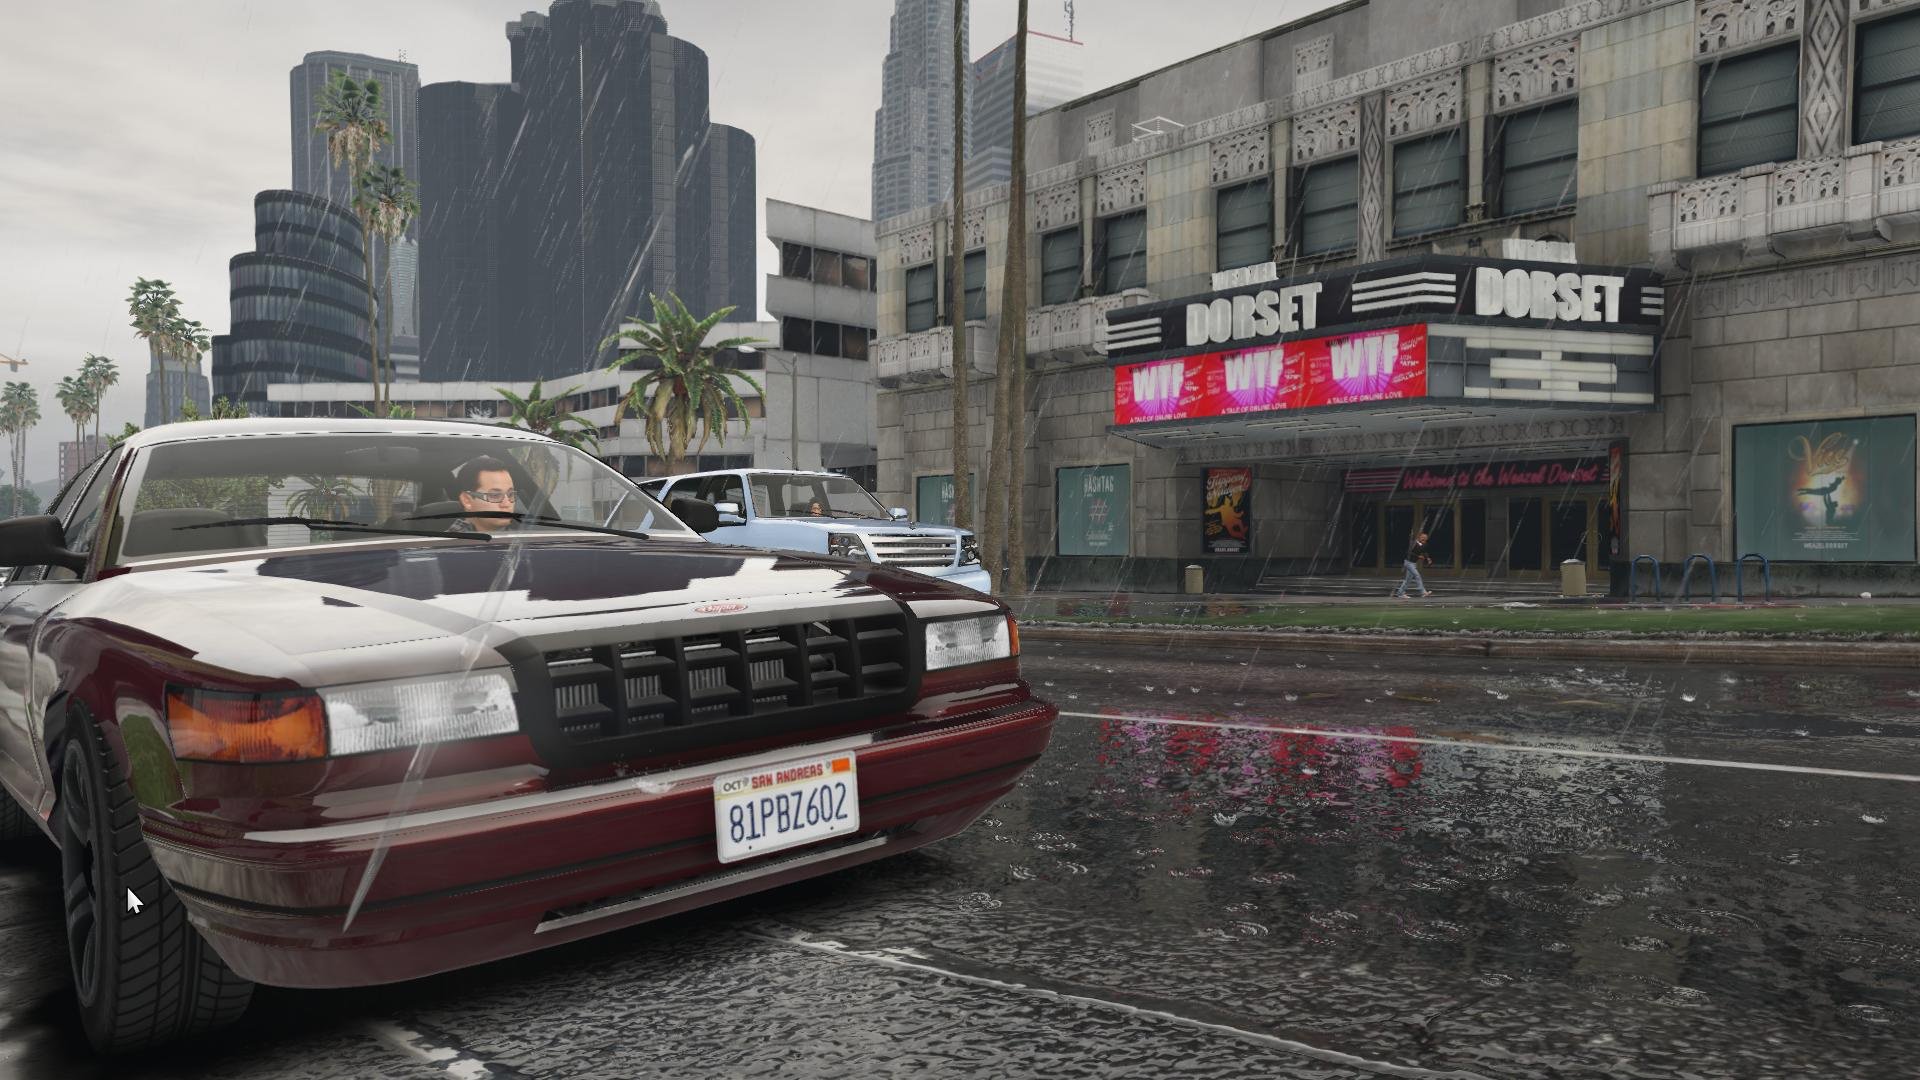 Grand Theft Auto IV Recreation In GTAV Engine Looks Amazing With ReShade Ray  Tracing and Awesomekills Graphics Mod